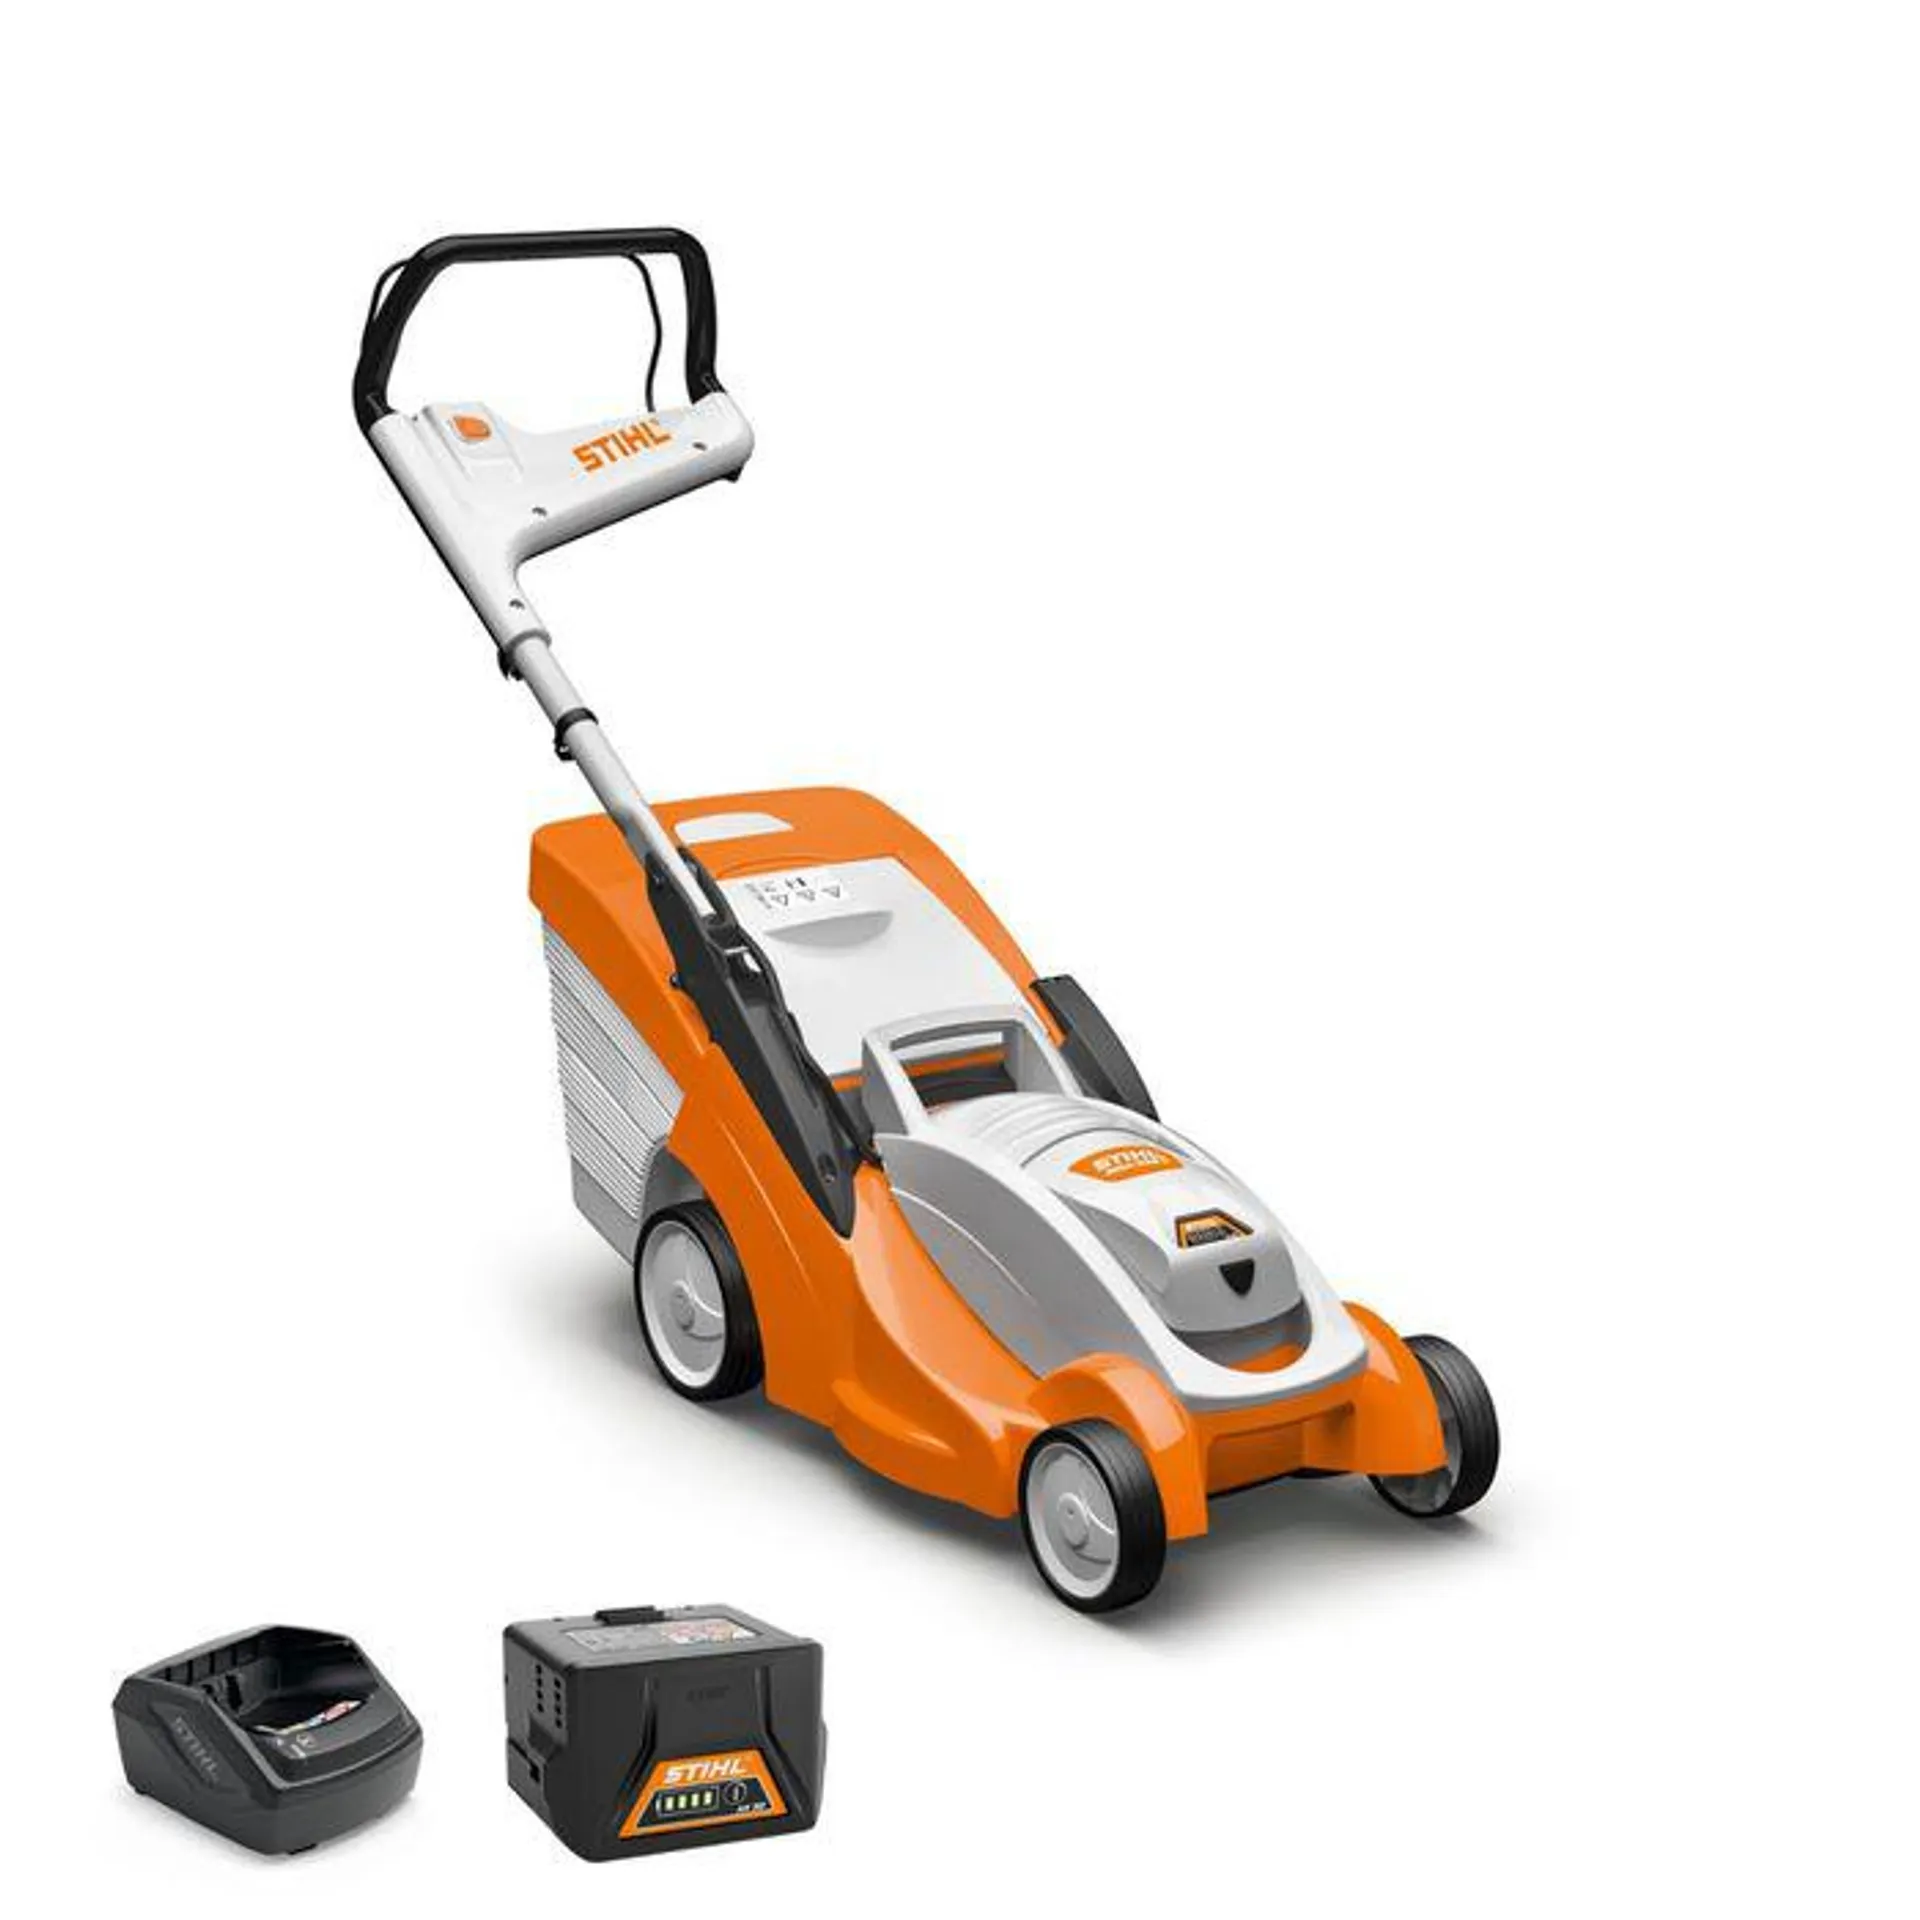 STIHL RMA 339 C AK Battery Lawnmower Kit (With Battery & Charger